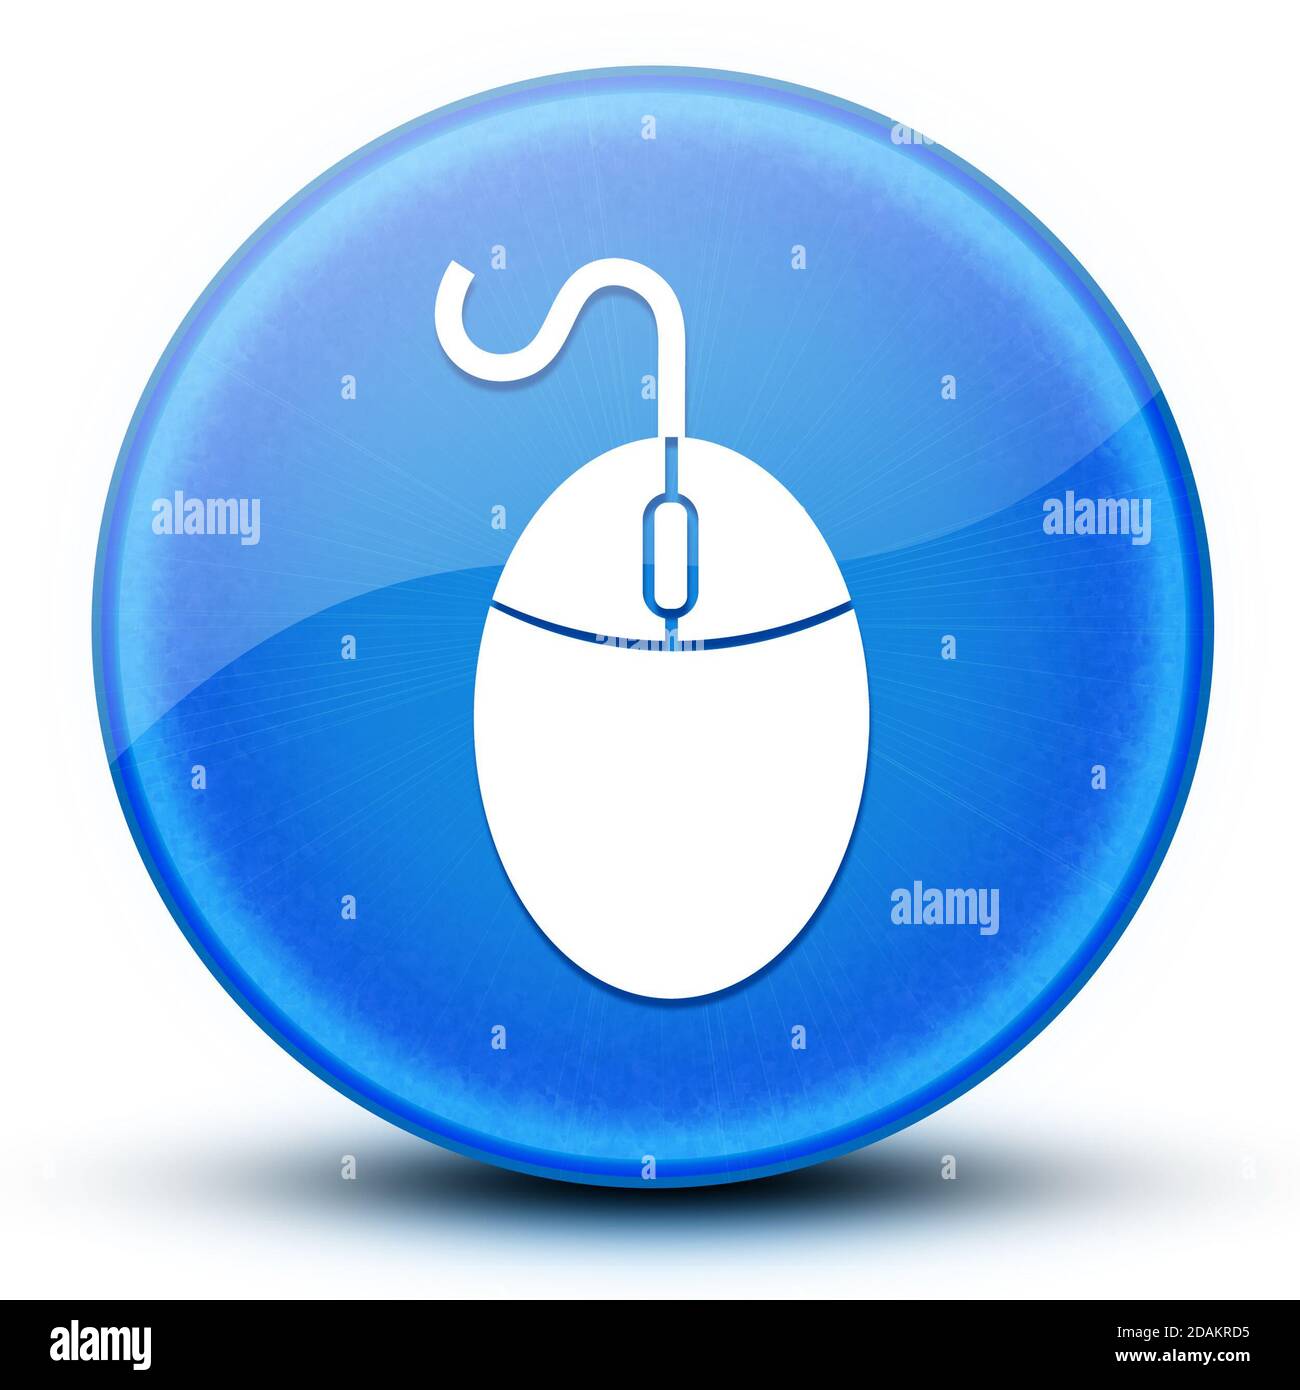 Mouse eyeball glossy blue round button abstract illustration Stock Photo